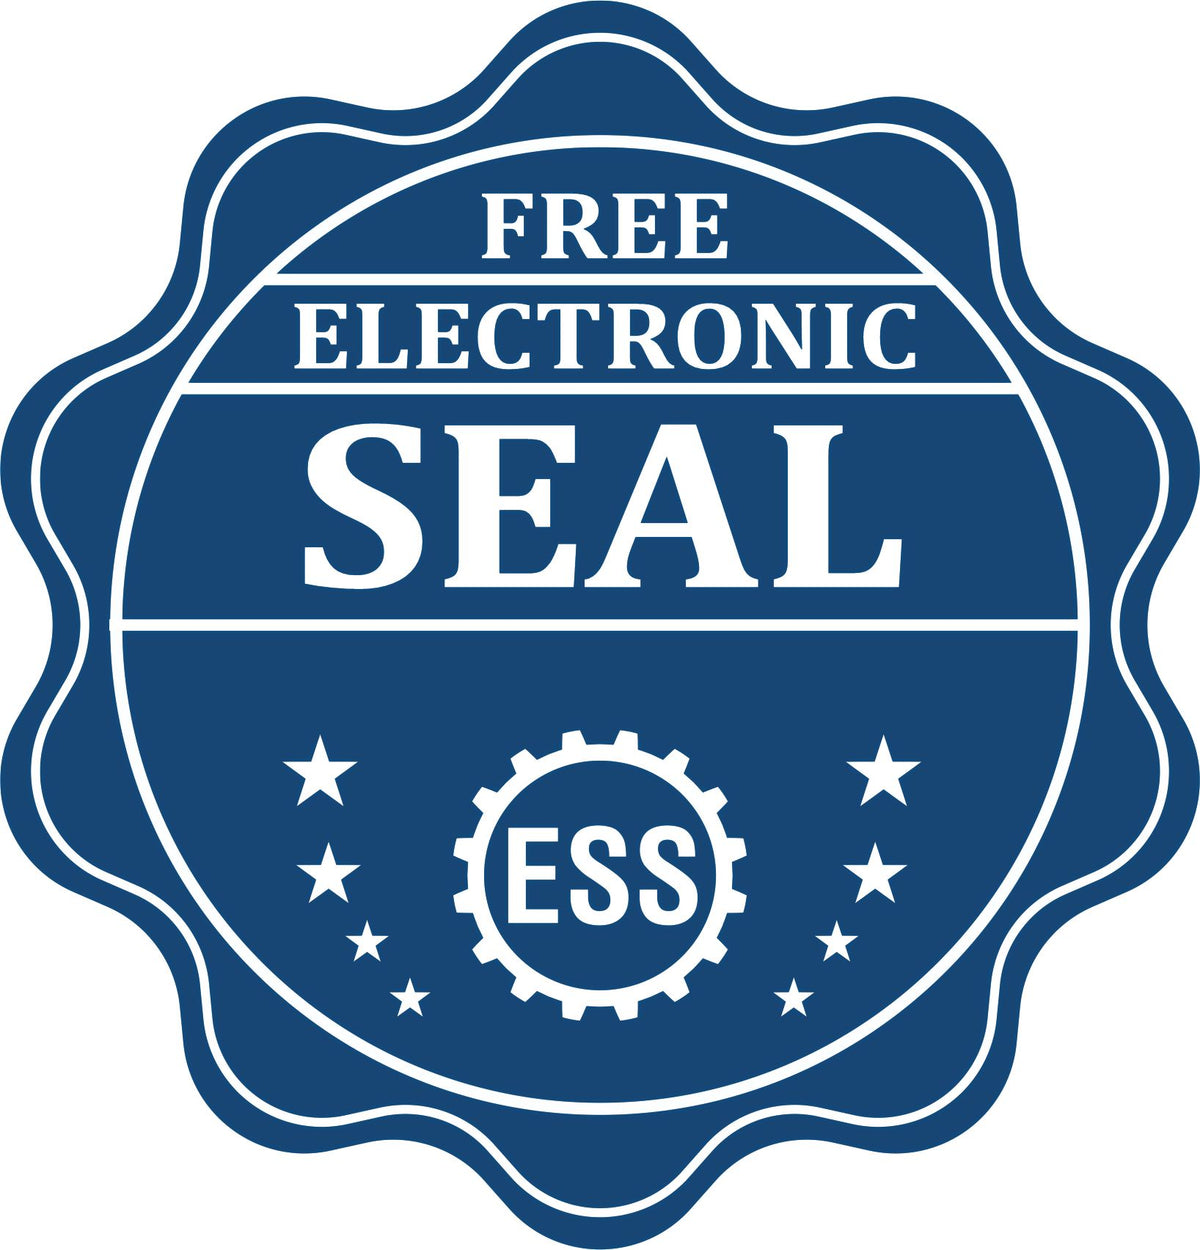 A badge showing a free electronic seal for the Heavy Duty Cast Iron North Carolina Geologist Seal Embosser with stars and the ESS gear on the emblem.